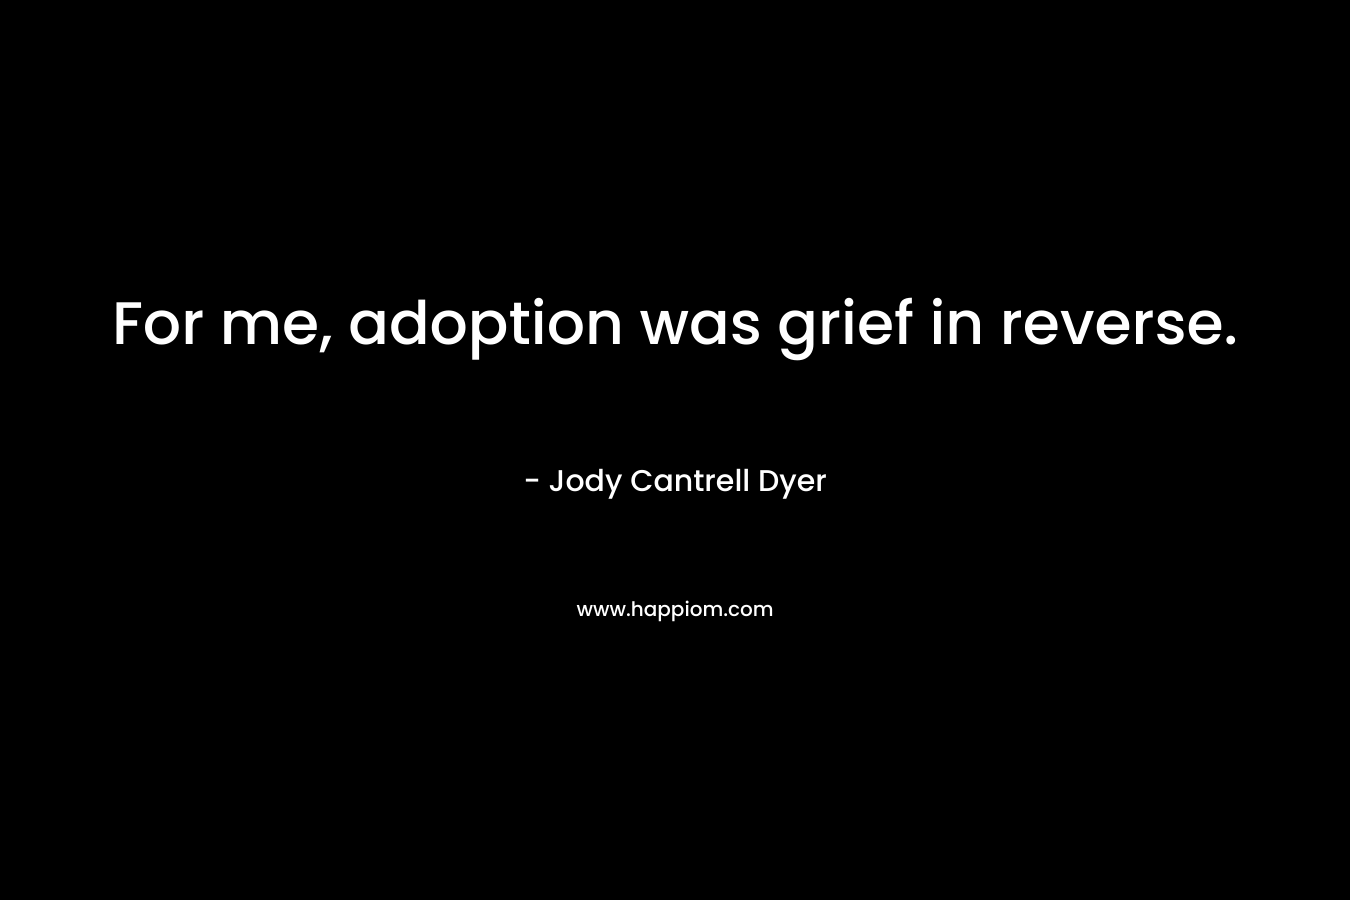 For me, adoption was grief in reverse.